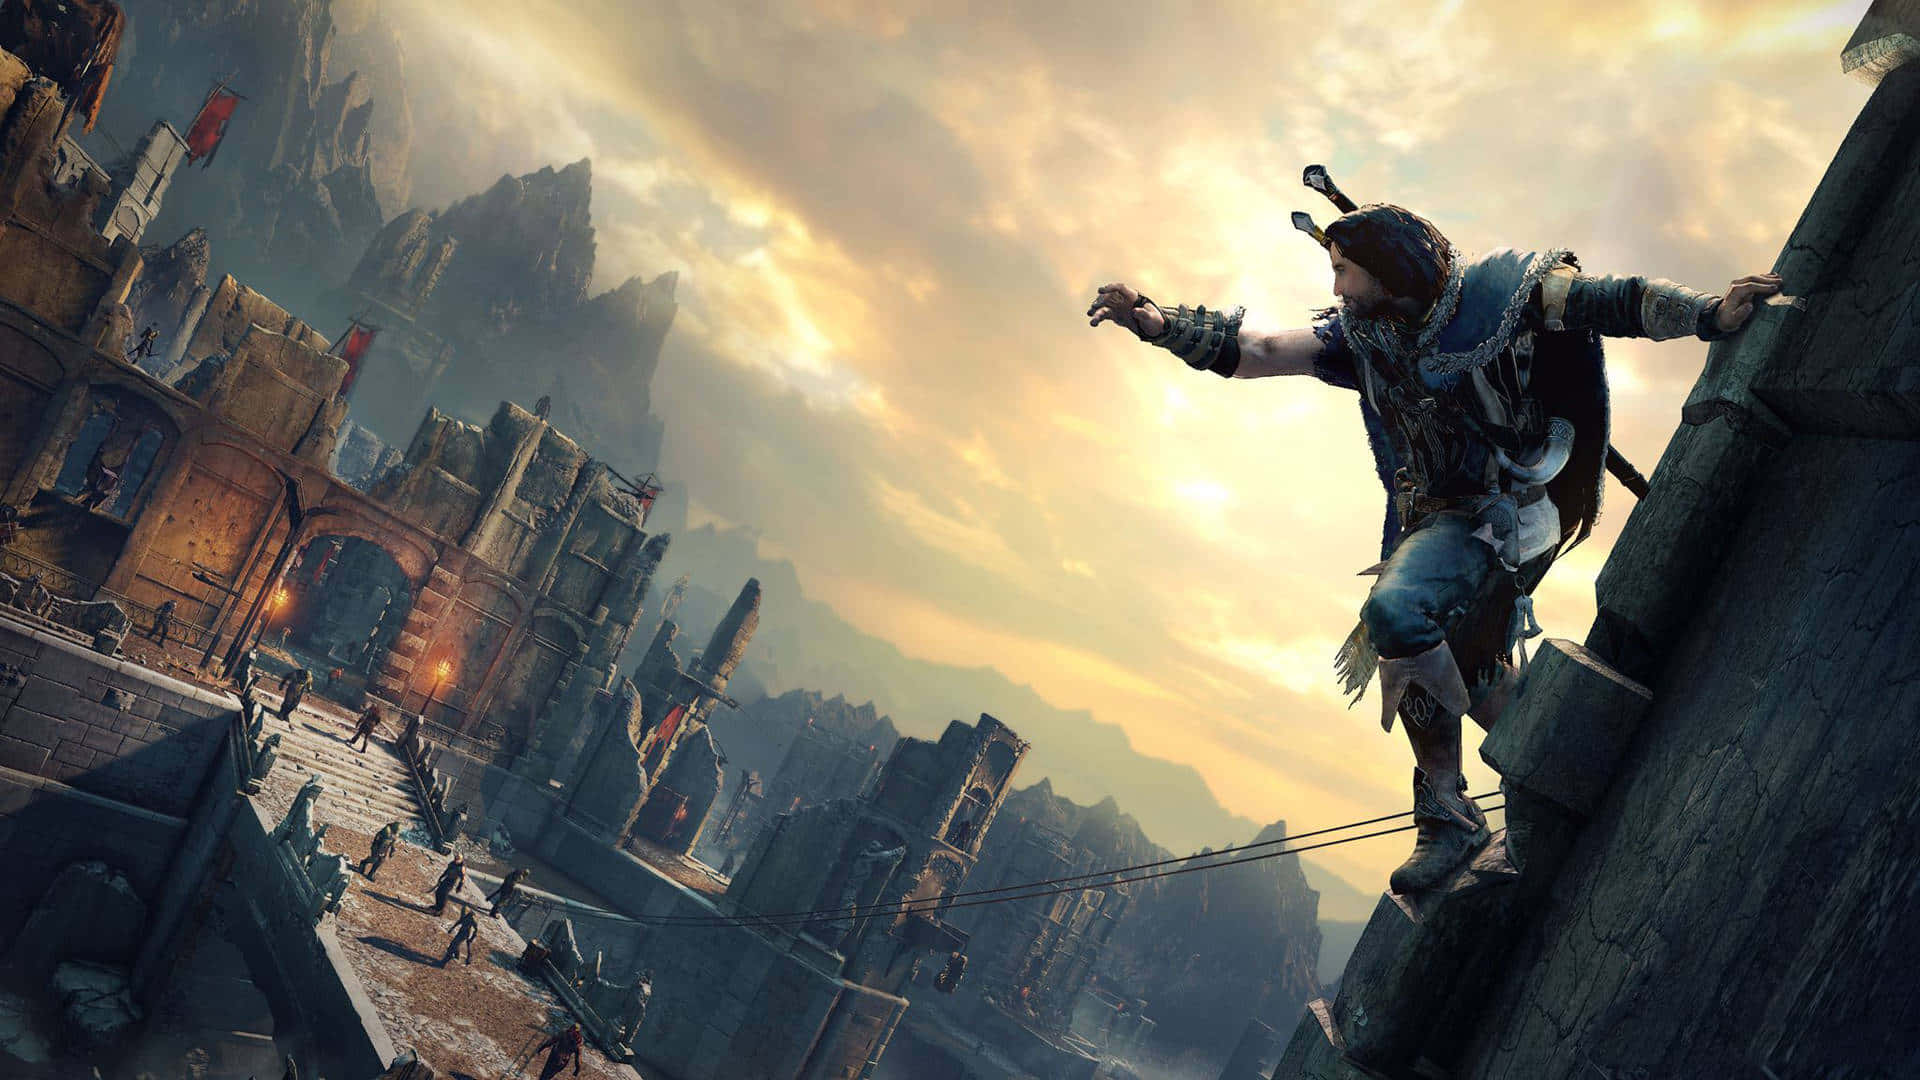 An epic adventure awaits in Middle-Earth in Shadow Of Mordor.